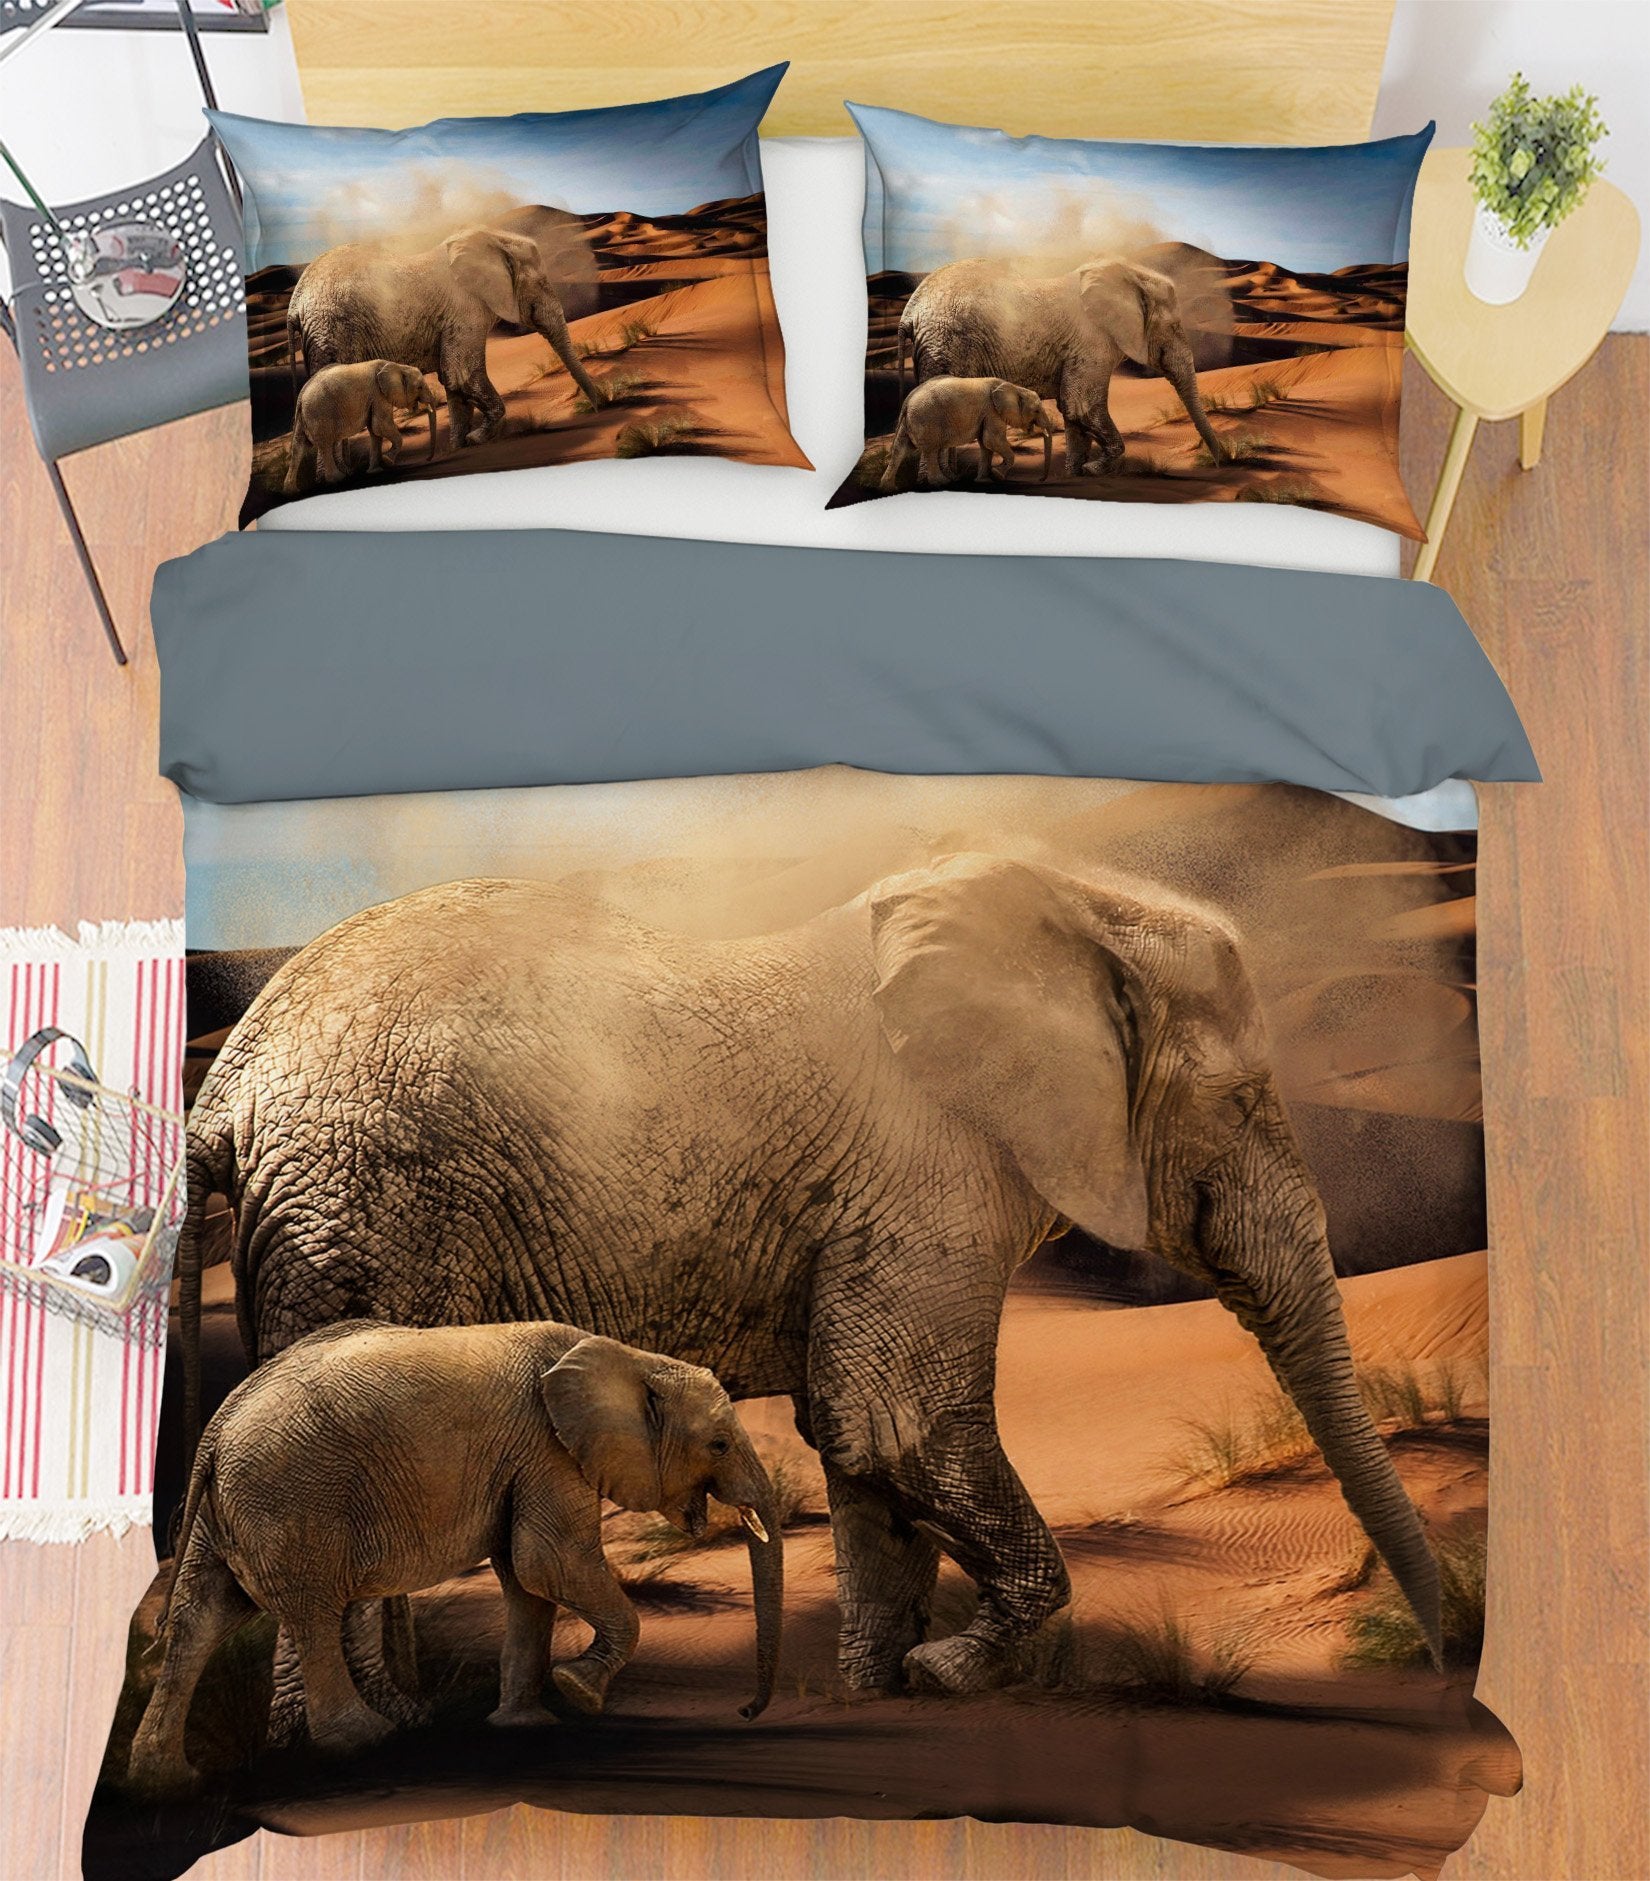 3D Elephant Group 1937 Bed Pillowcases Quilt Quiet Covers AJ Creativity Home 